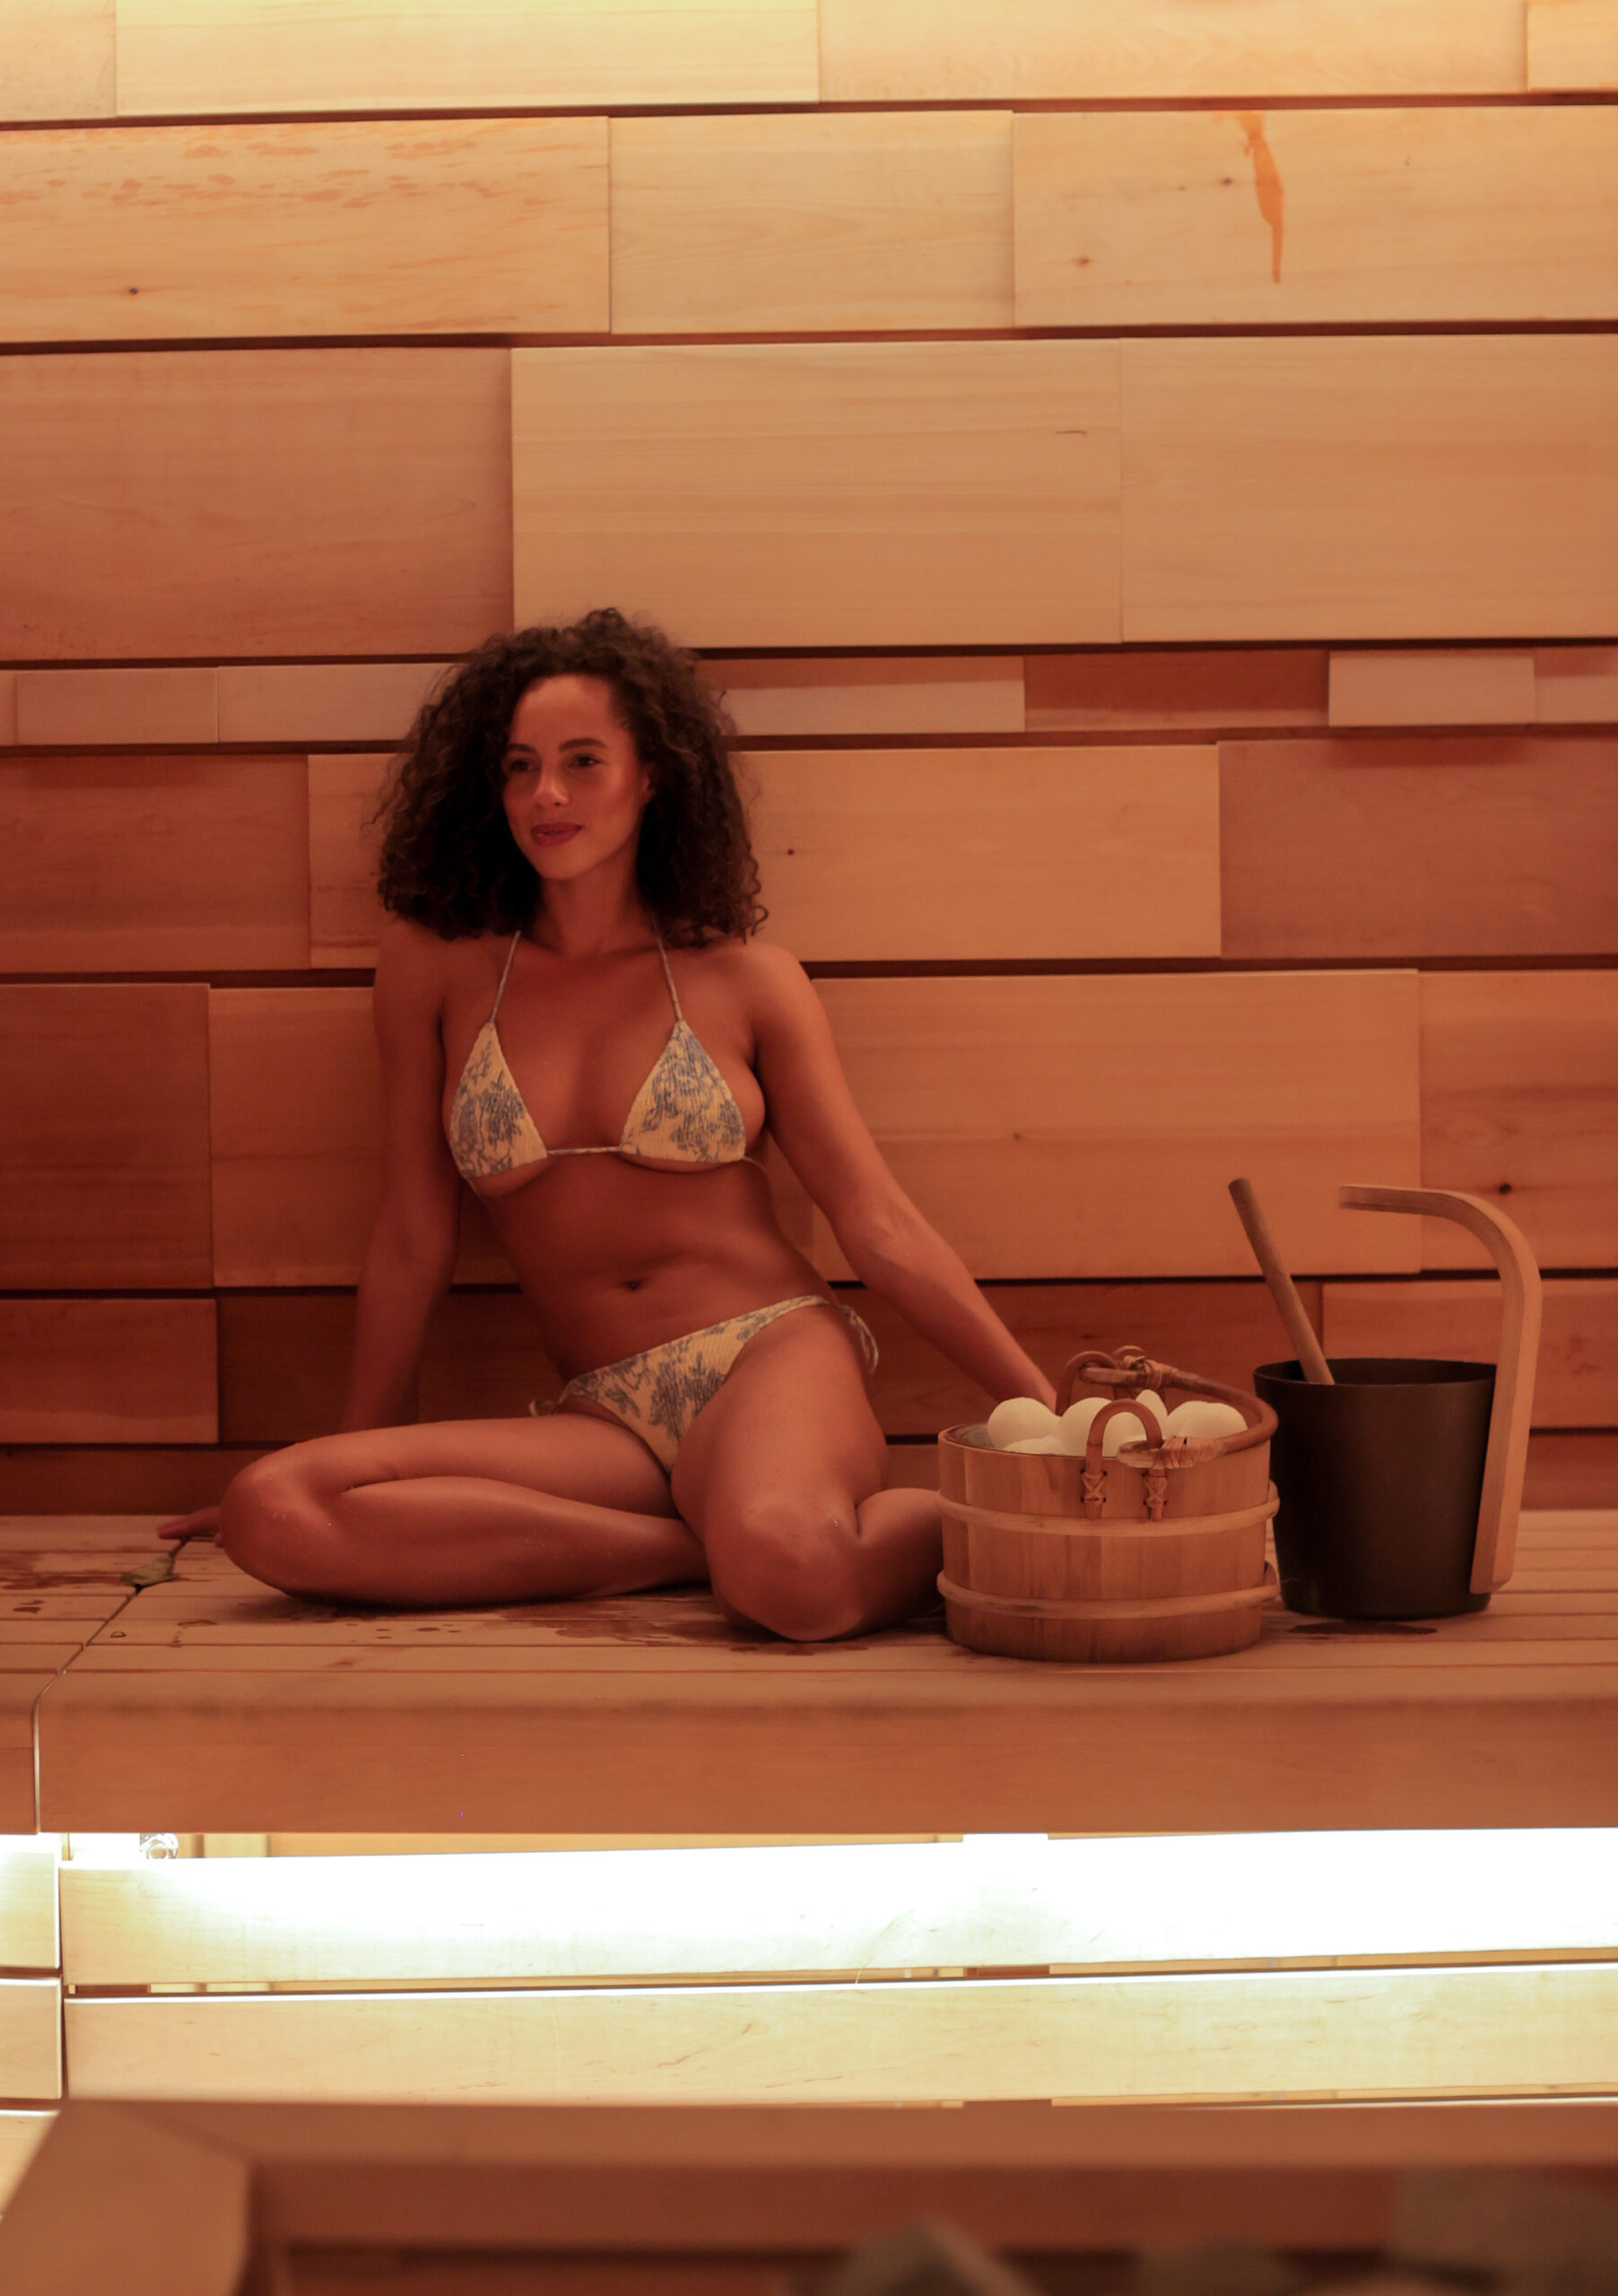 A person is seated in a sauna with wooden walls and benches, and items for a sauna session nearby. The atmosphere is warm and tranquil.